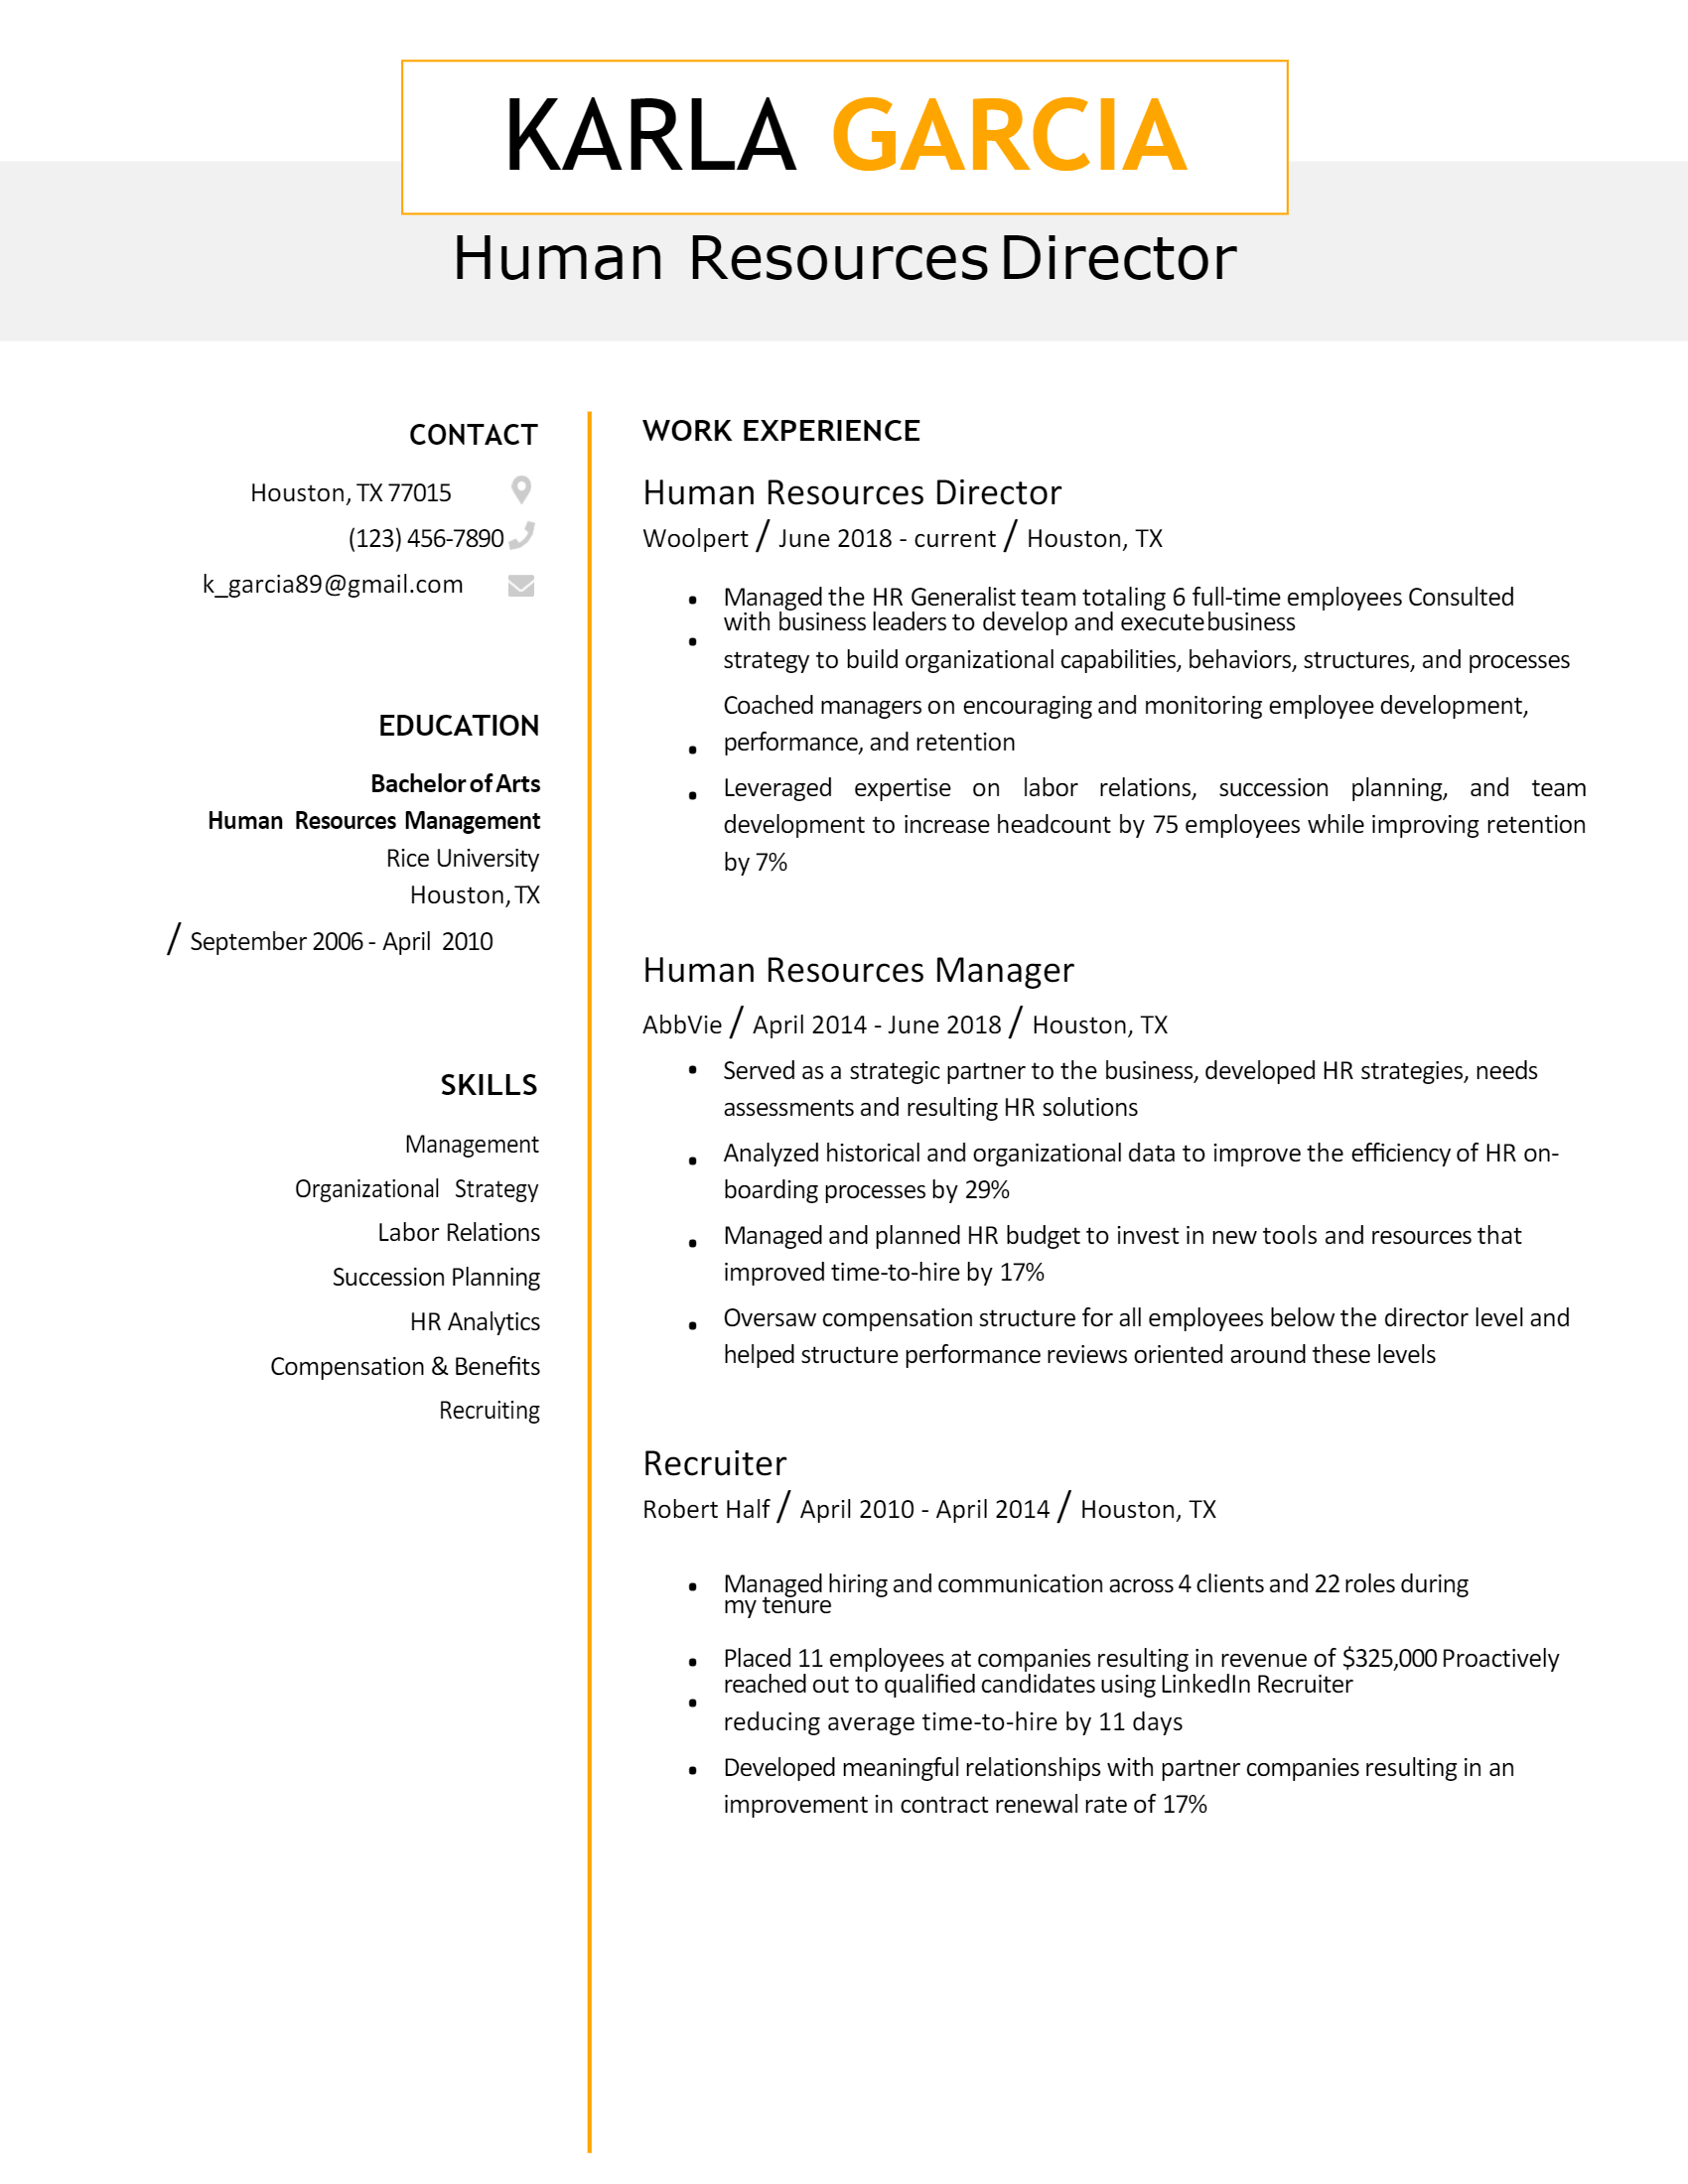 Human Resources Director Resume .Docx (Word)